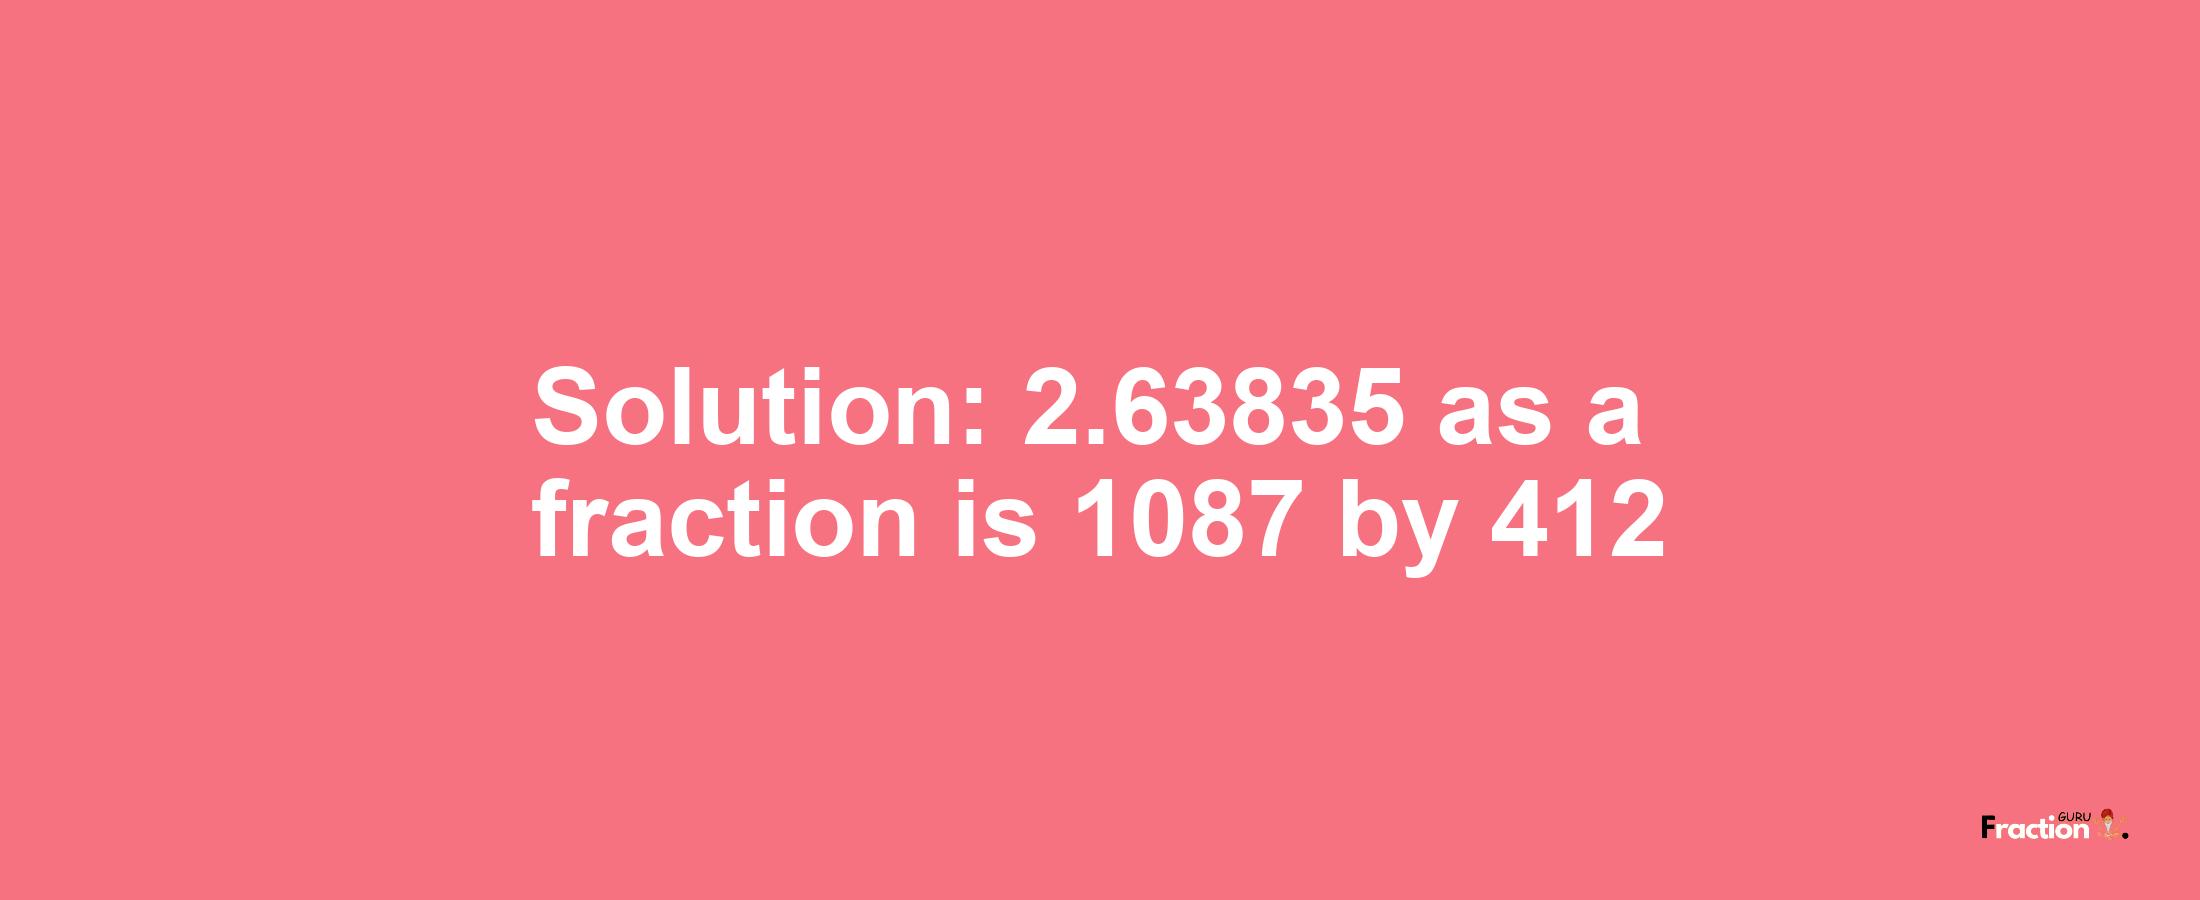 Solution:2.63835 as a fraction is 1087/412